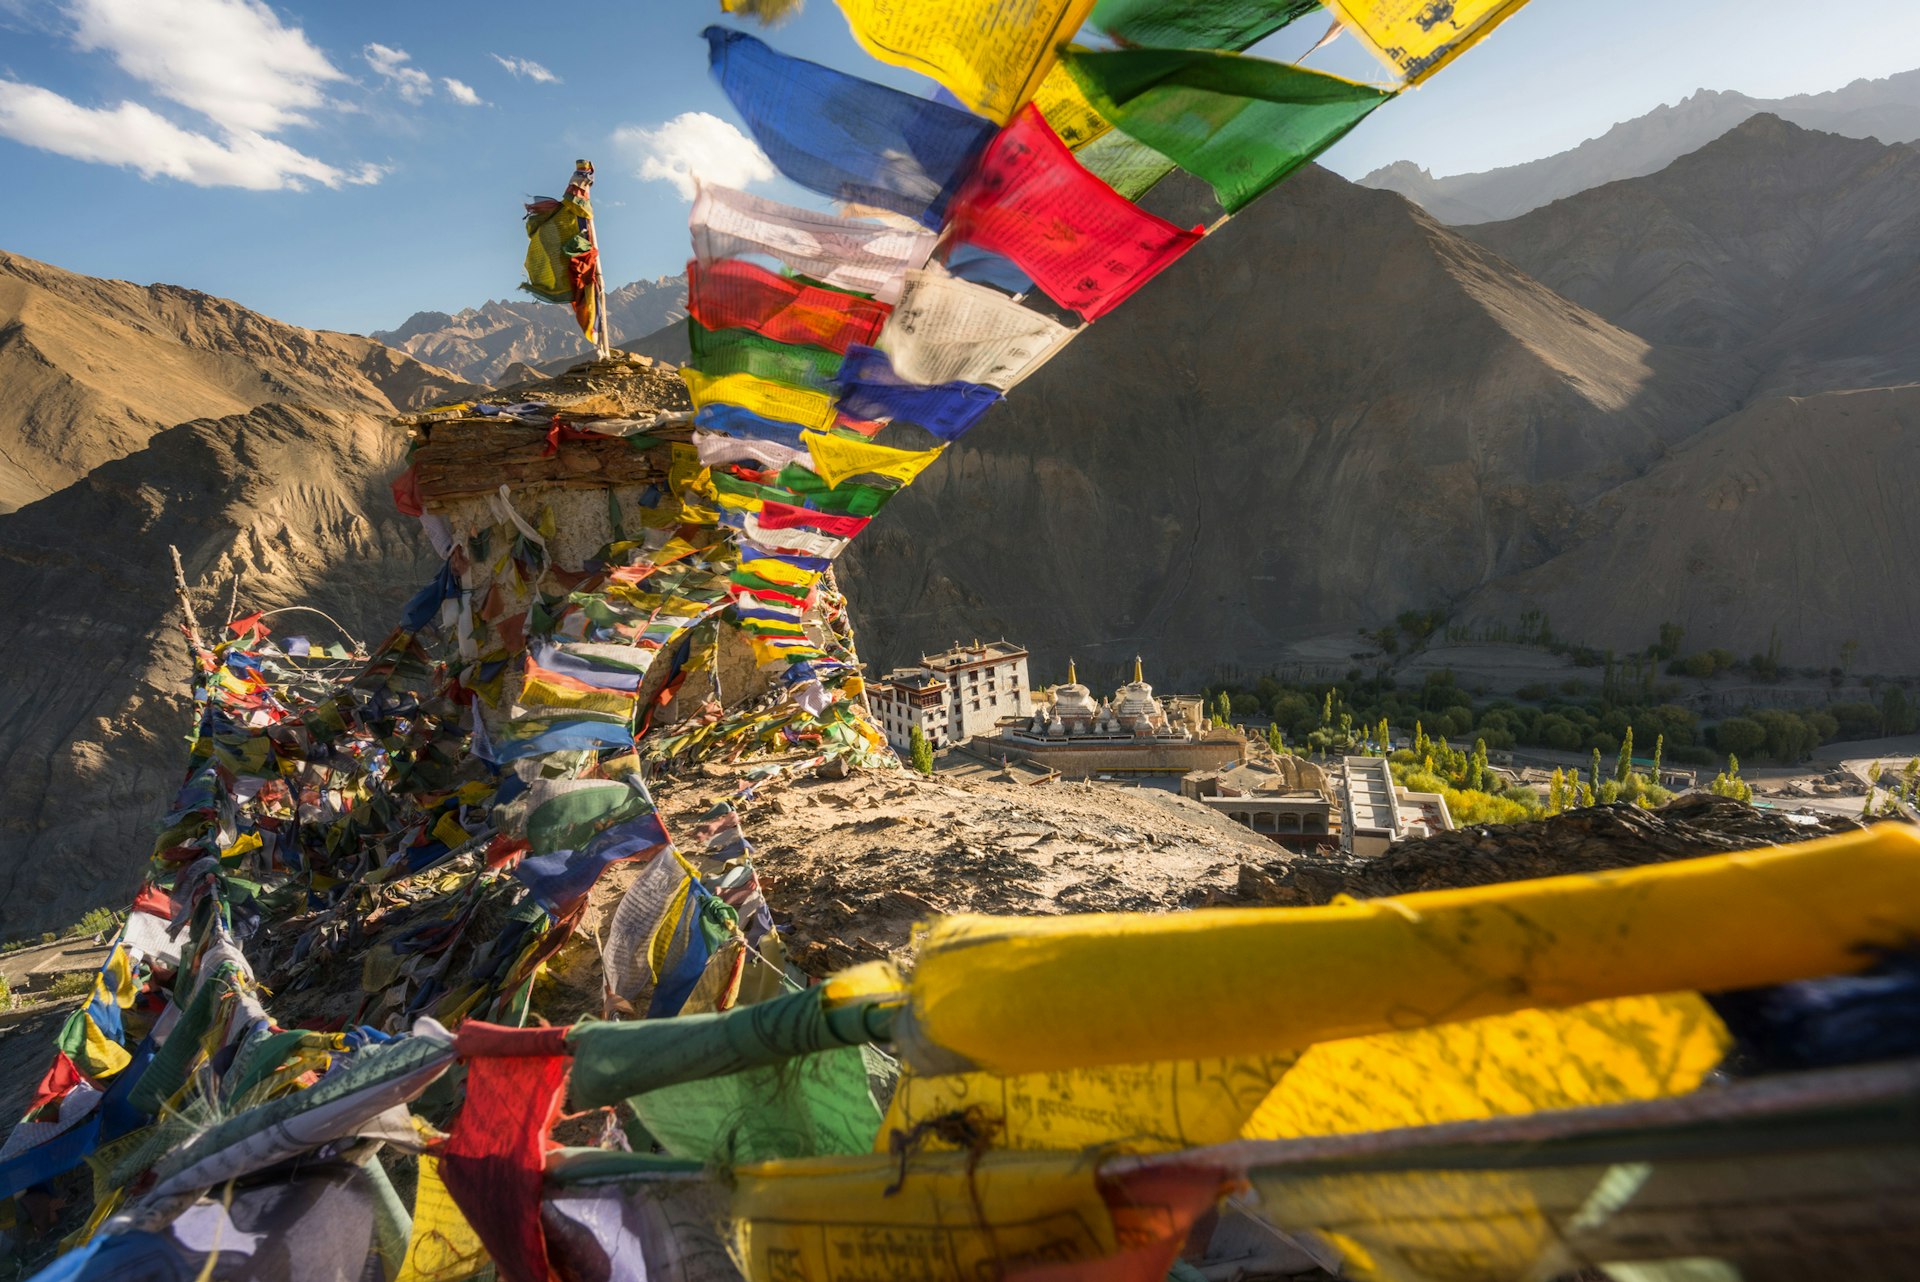 Colorful prayer flags strung high on a mountain top with a monastery in the distance